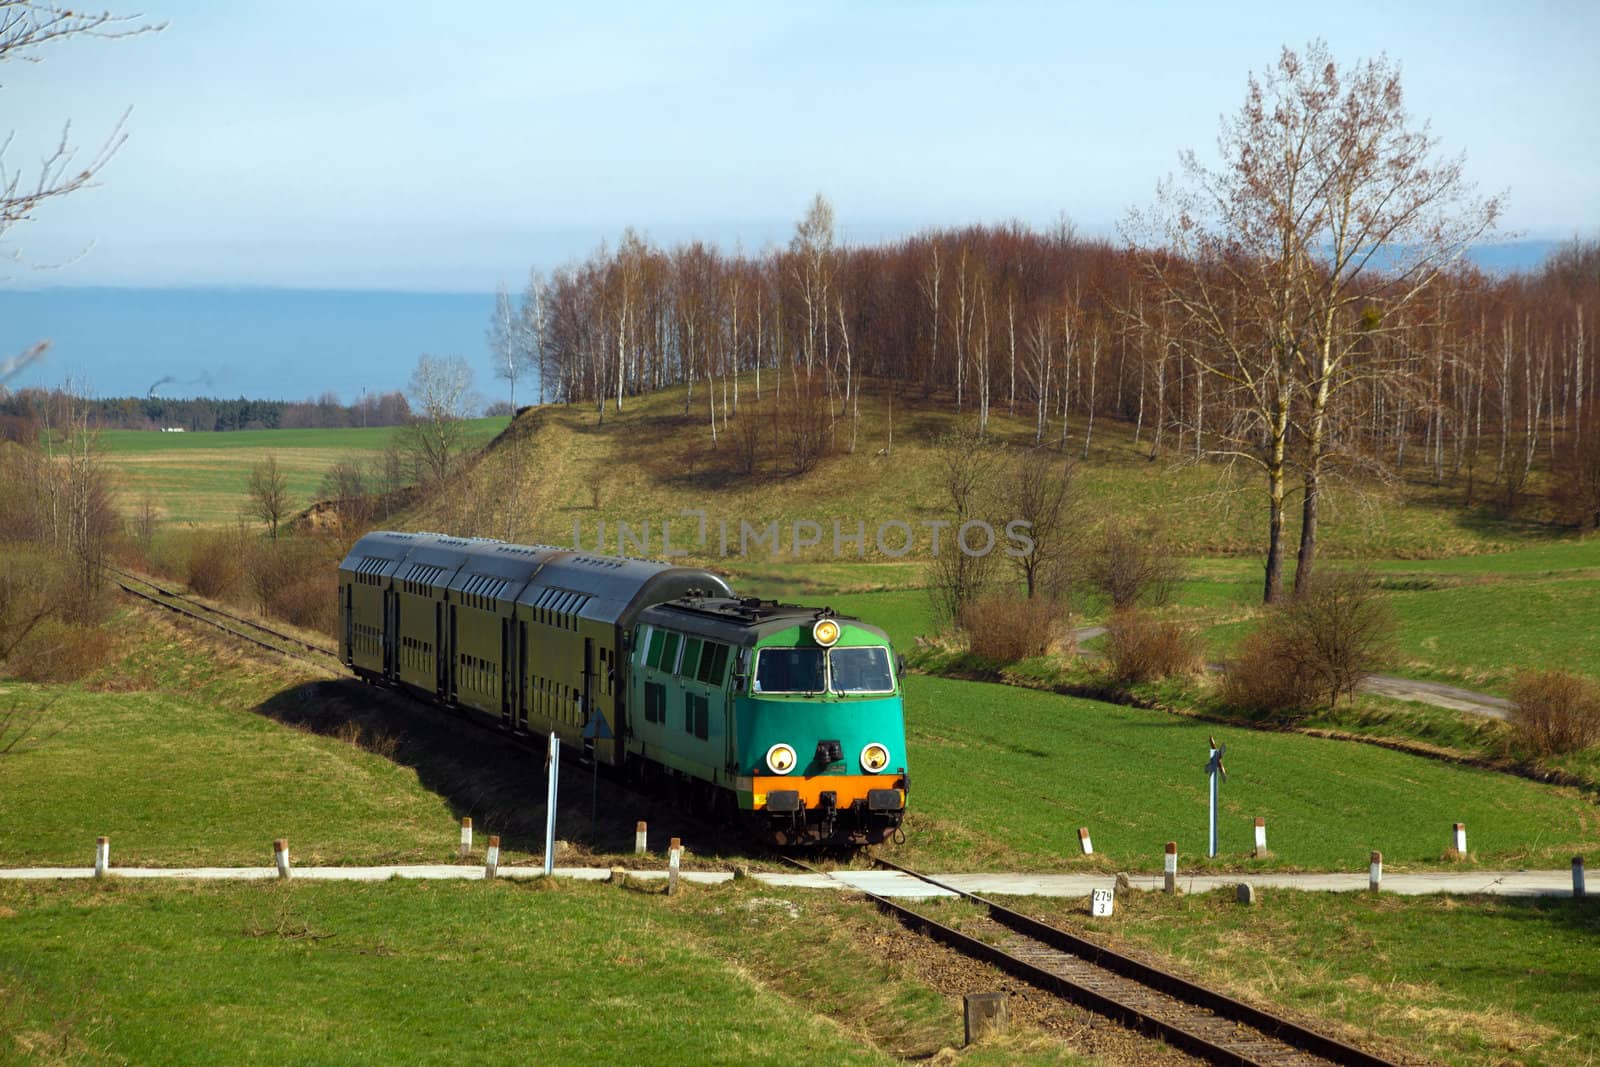 Passenger train passing through countryside by remik44992